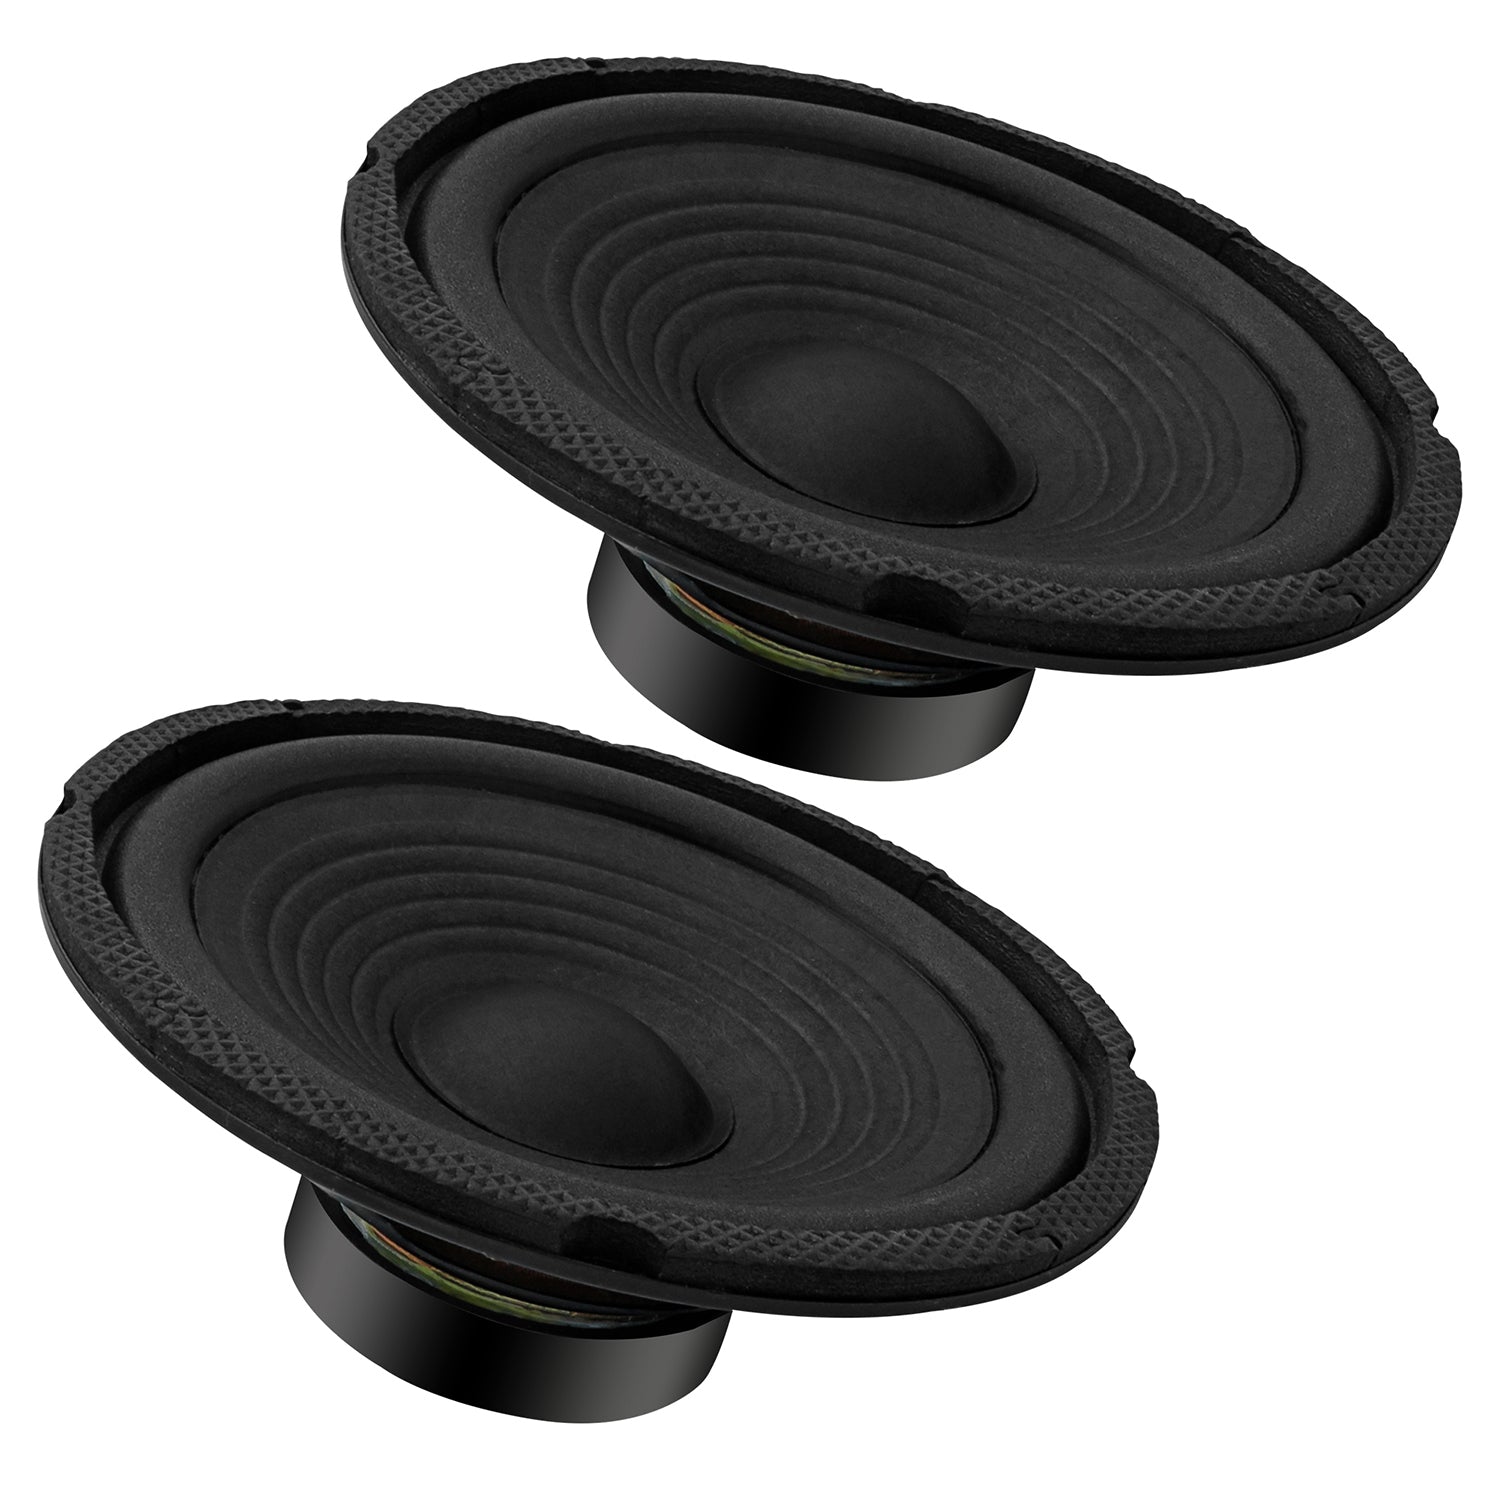 5Core 6 Inch Subwoofer Car Audio 30W RMS 4 OHM Bass Sub Woofer Replacement Speaker 2Pcs